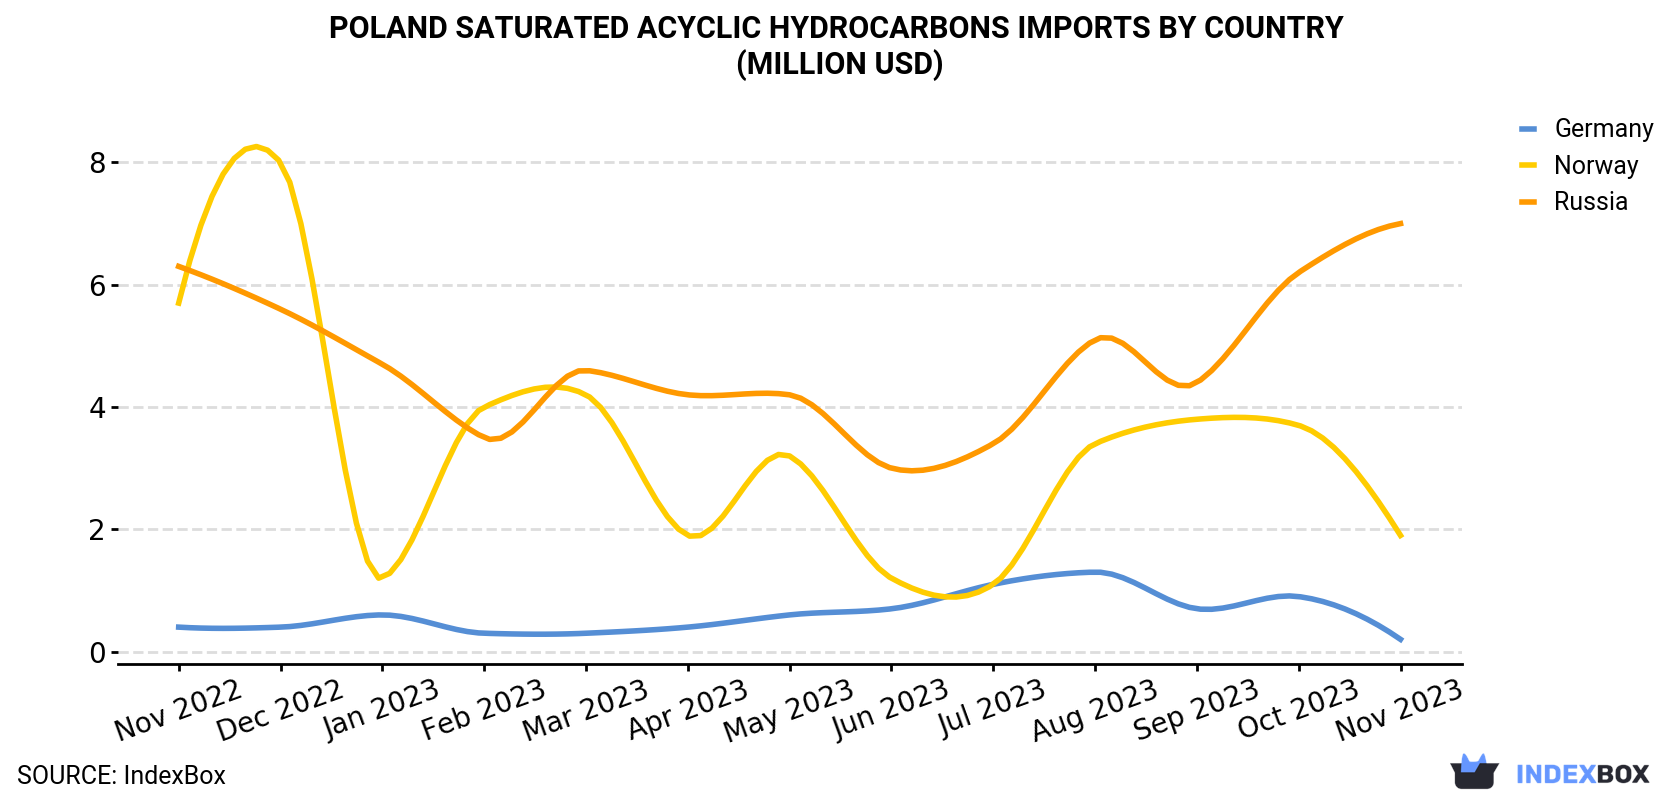 Poland Saturated Acyclic Hydrocarbons Imports By Country (Million USD)